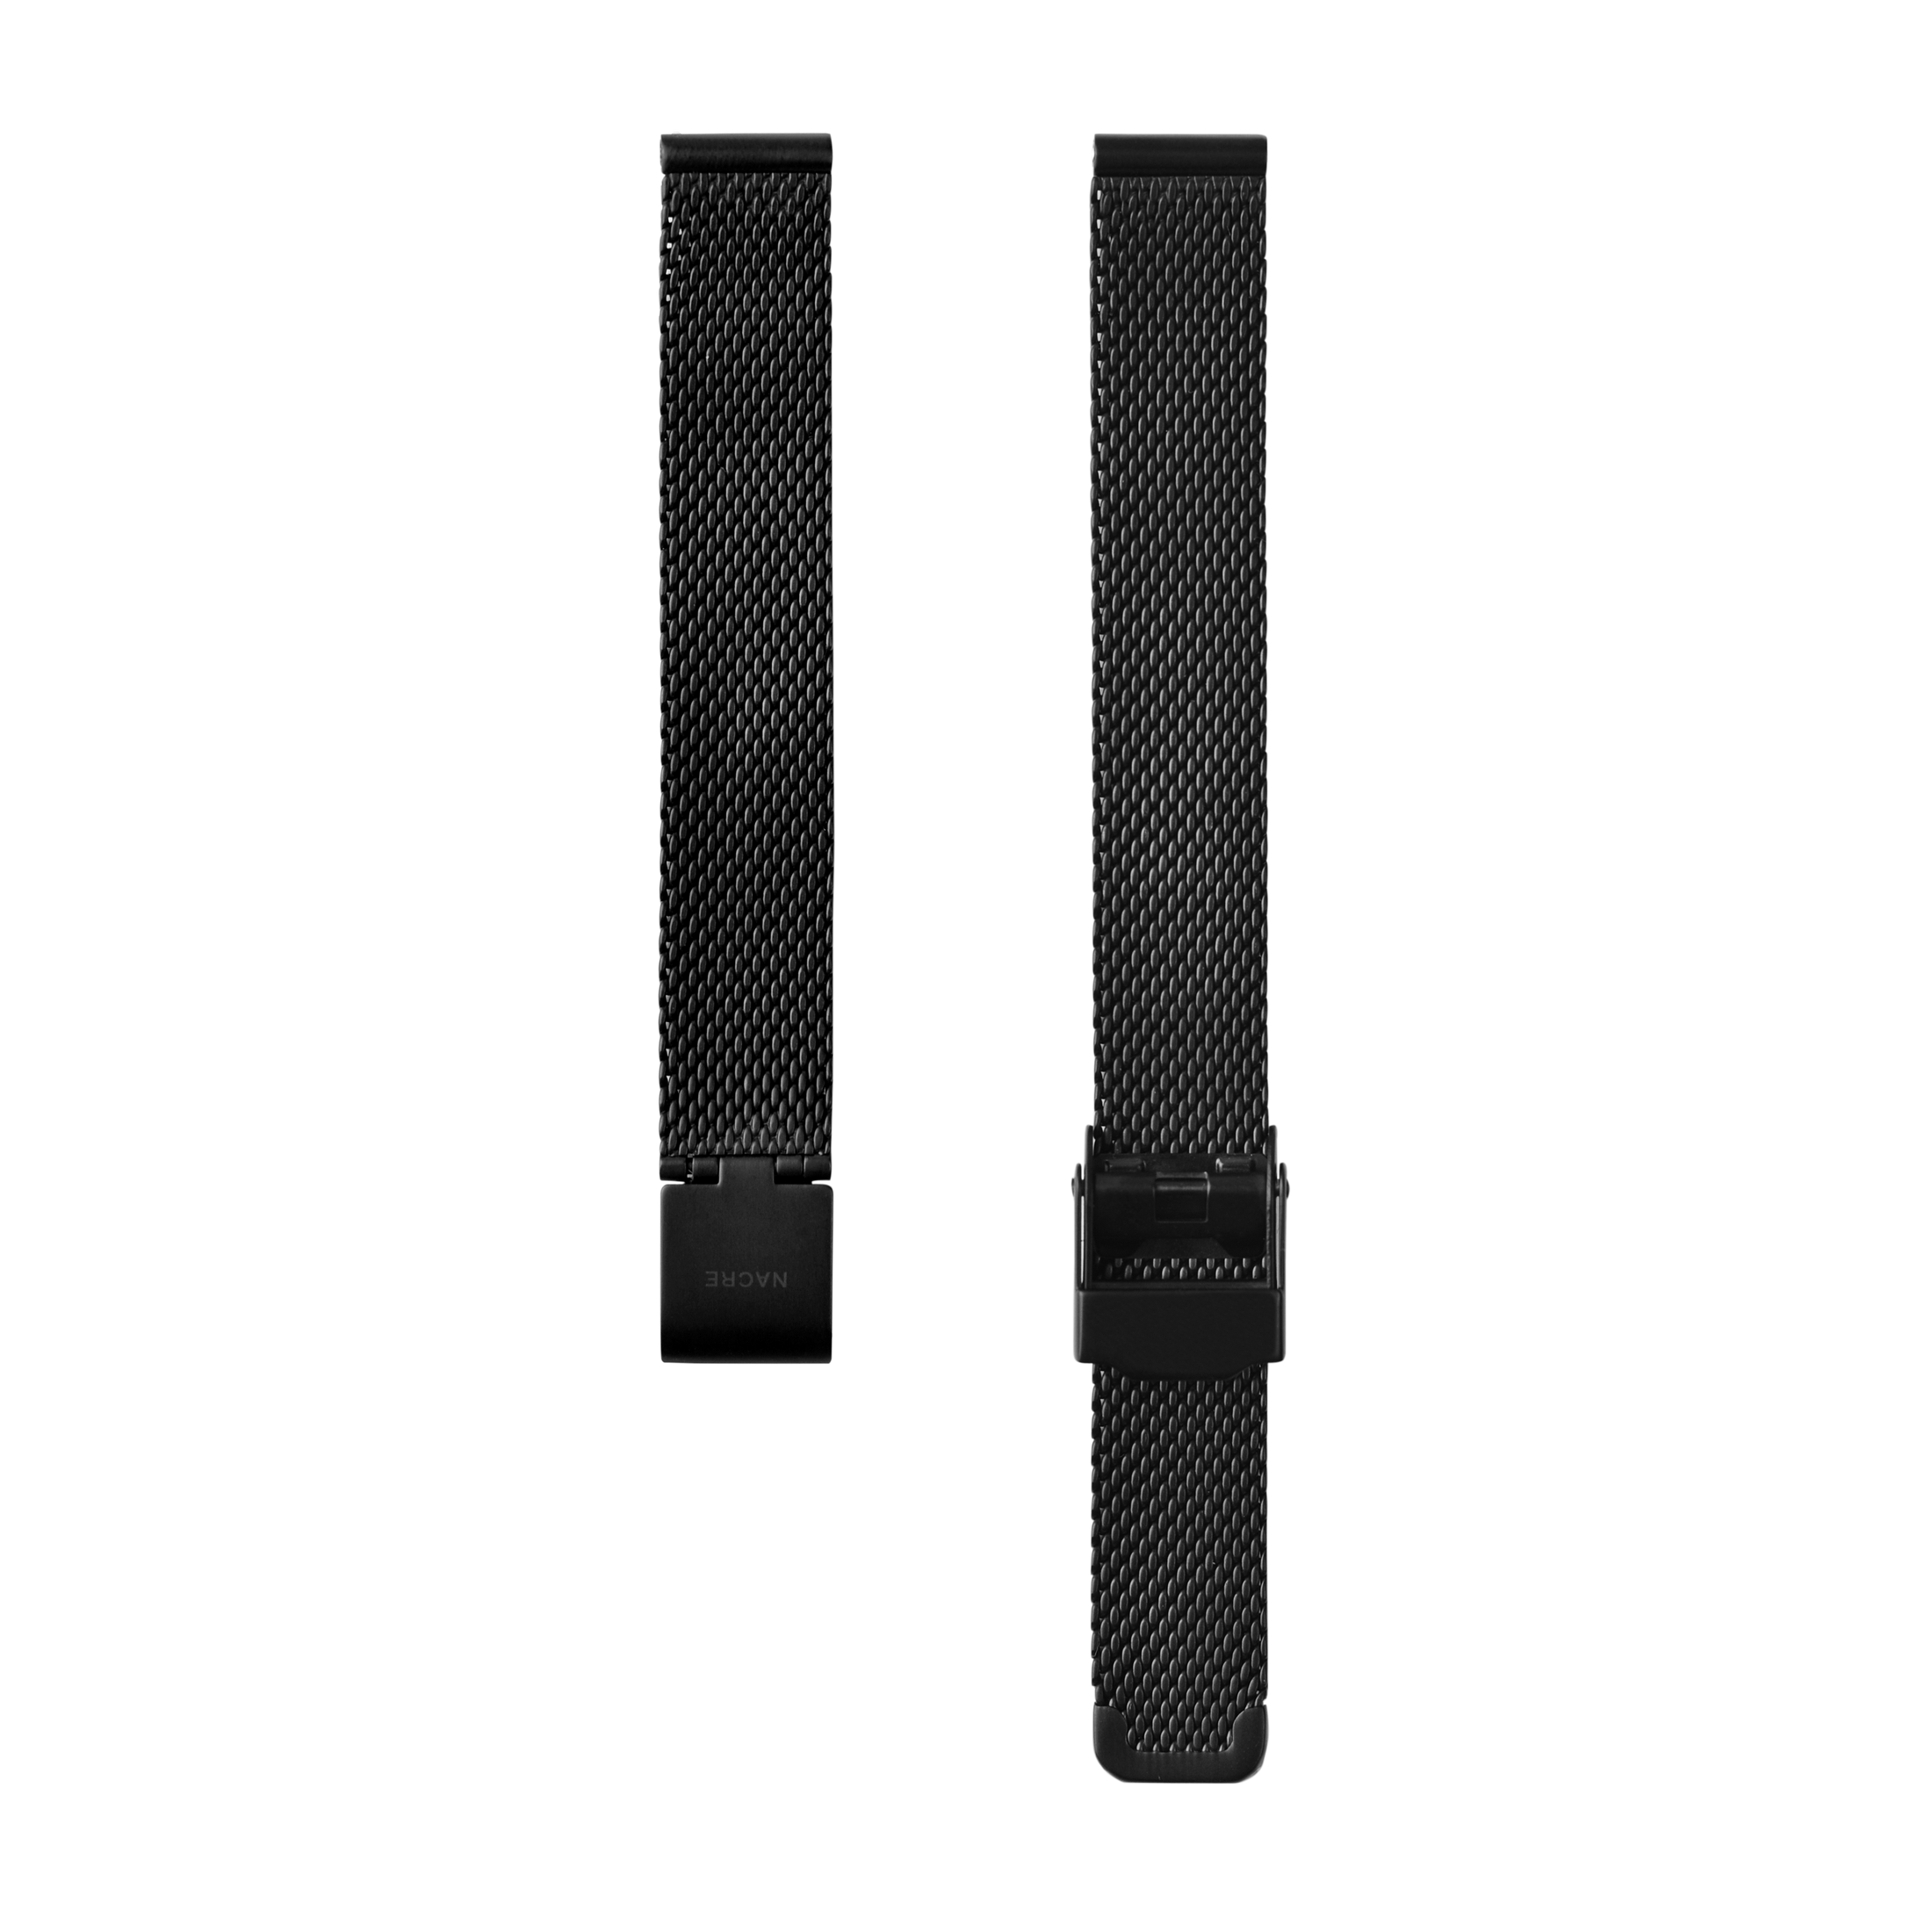 Strap - Italian Leather - Navy Leather - Matte Black - 12mm